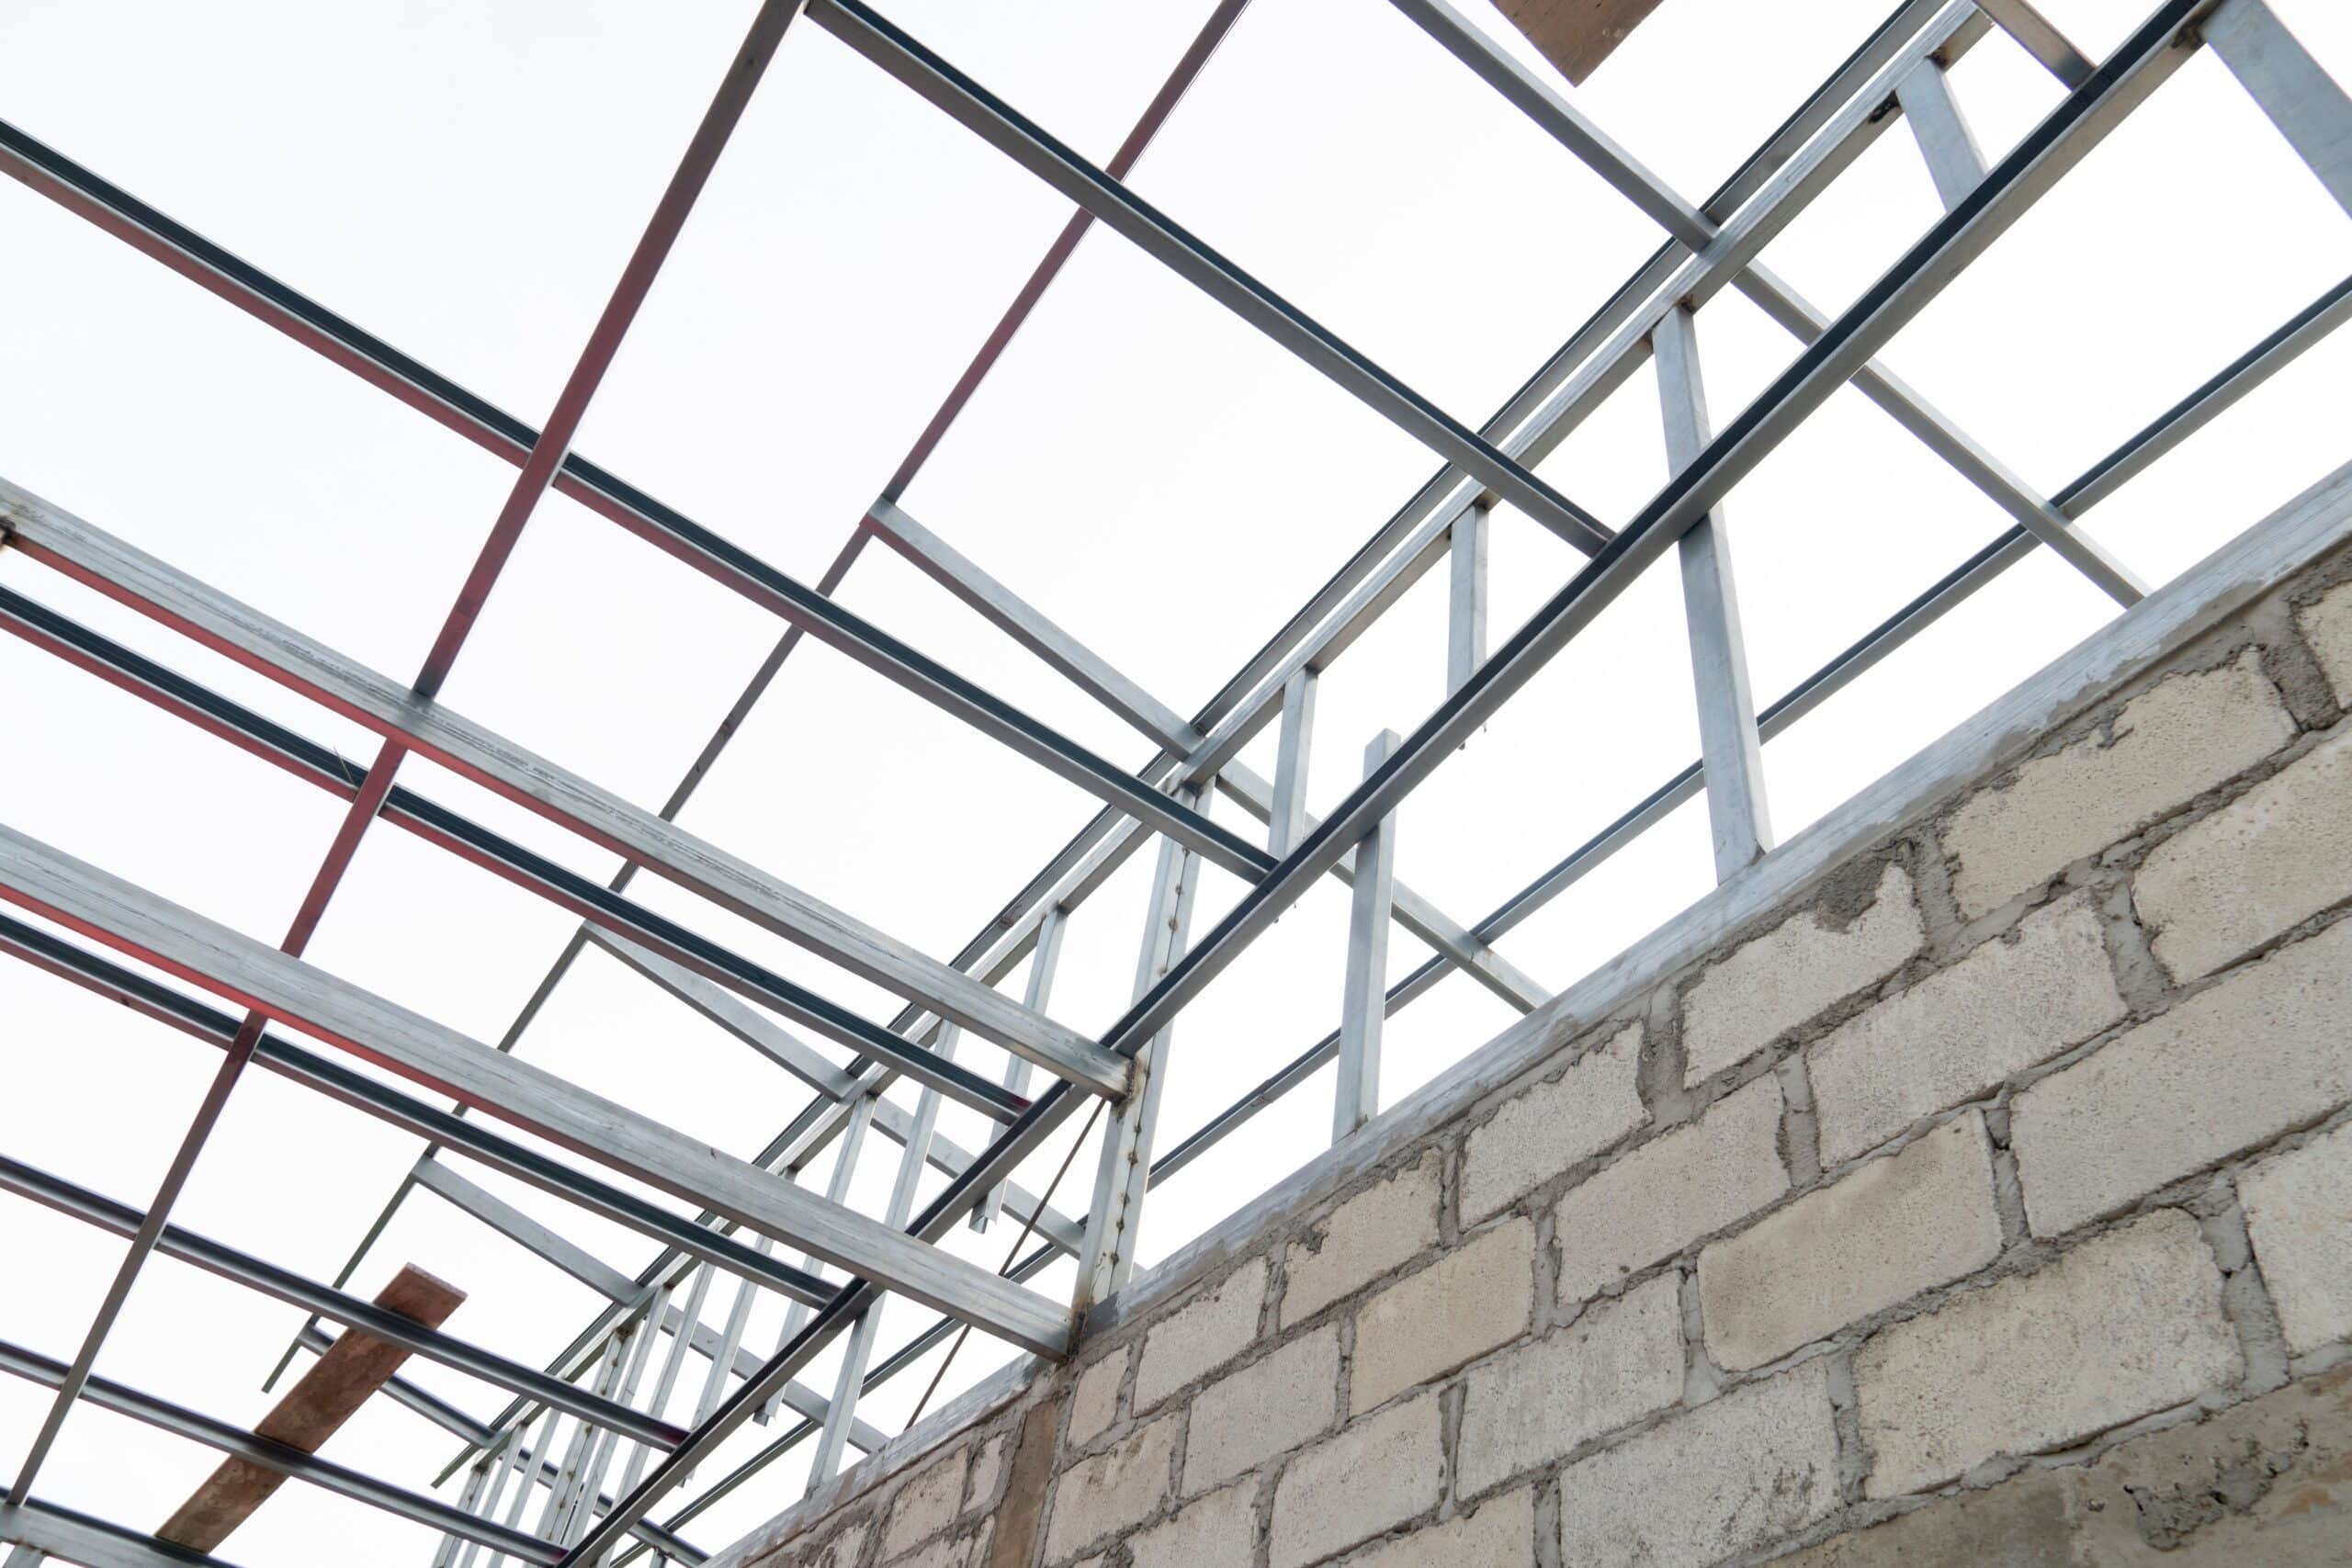 The Ultimate Guide to Understanding Concrete Lintels and Steel Beams